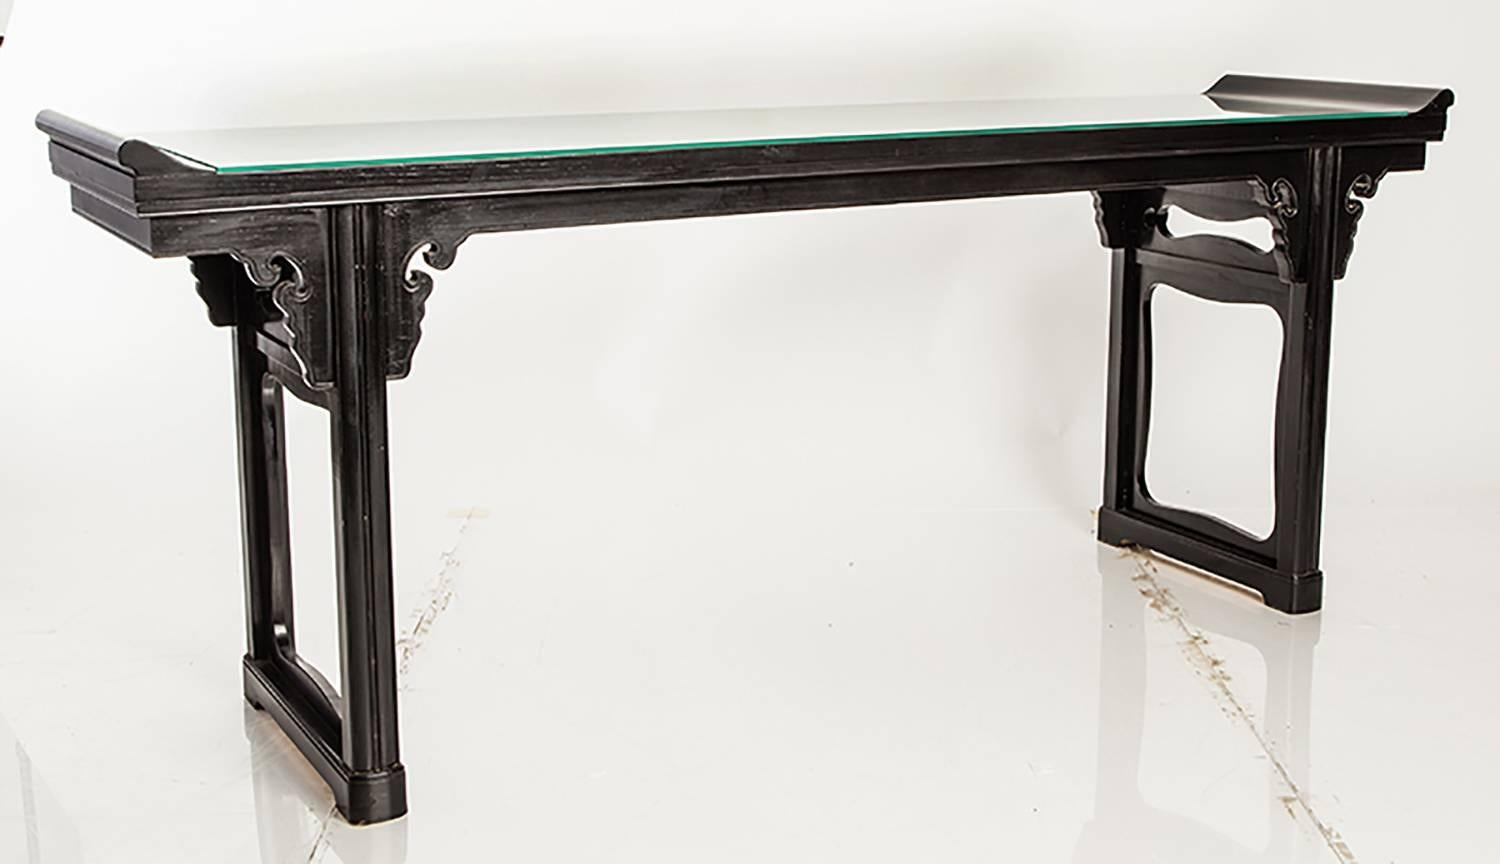 Black lacquer console table in the style of a traditional Asian altar table.